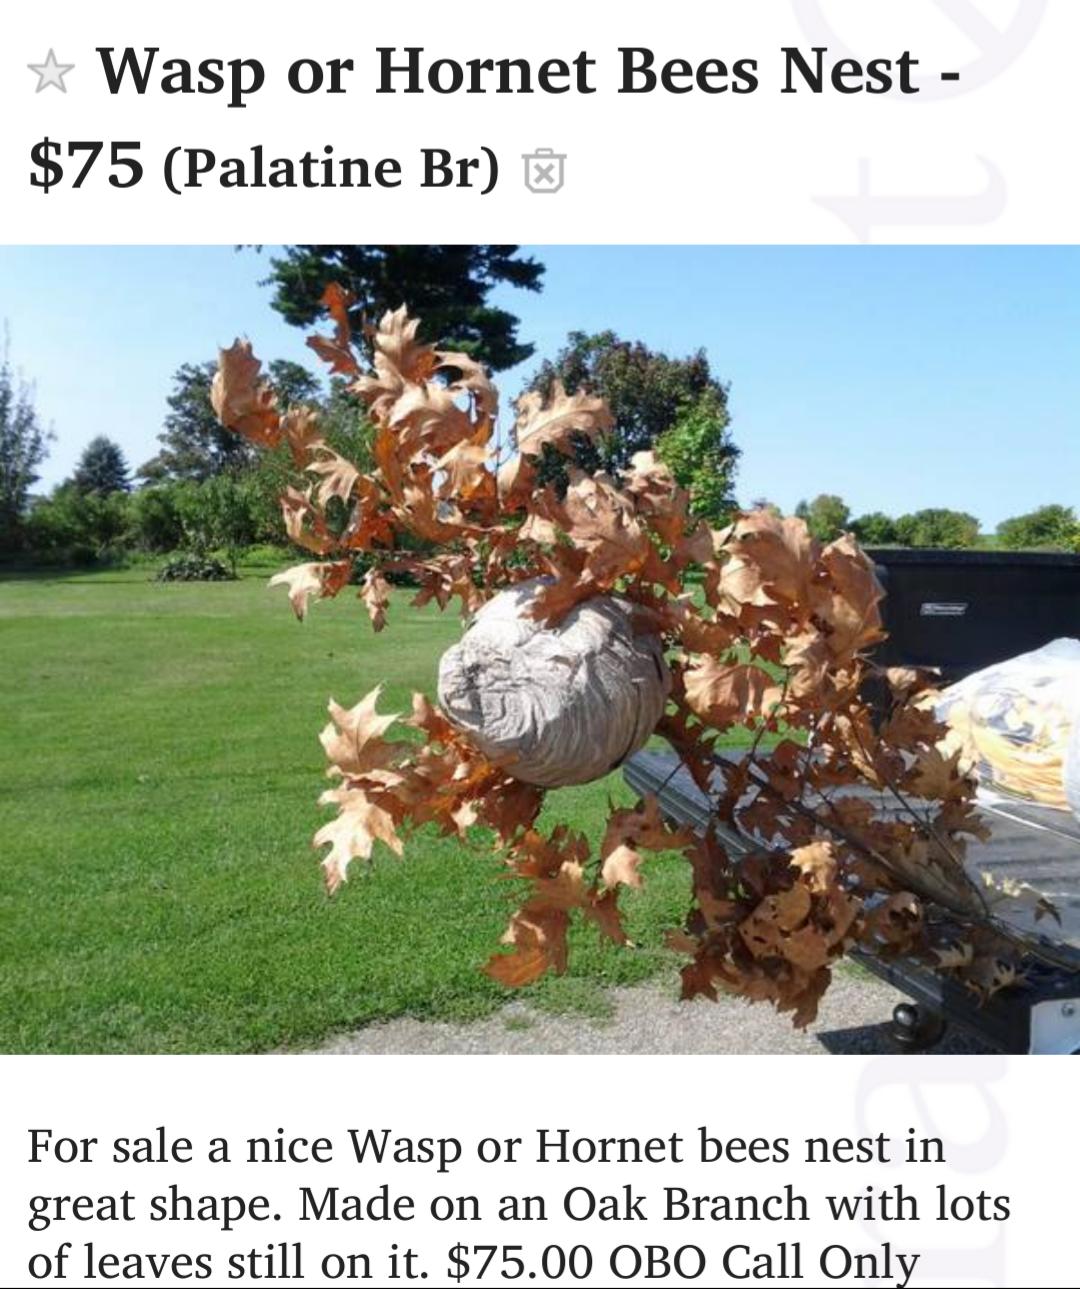 For wasp nest collectors...